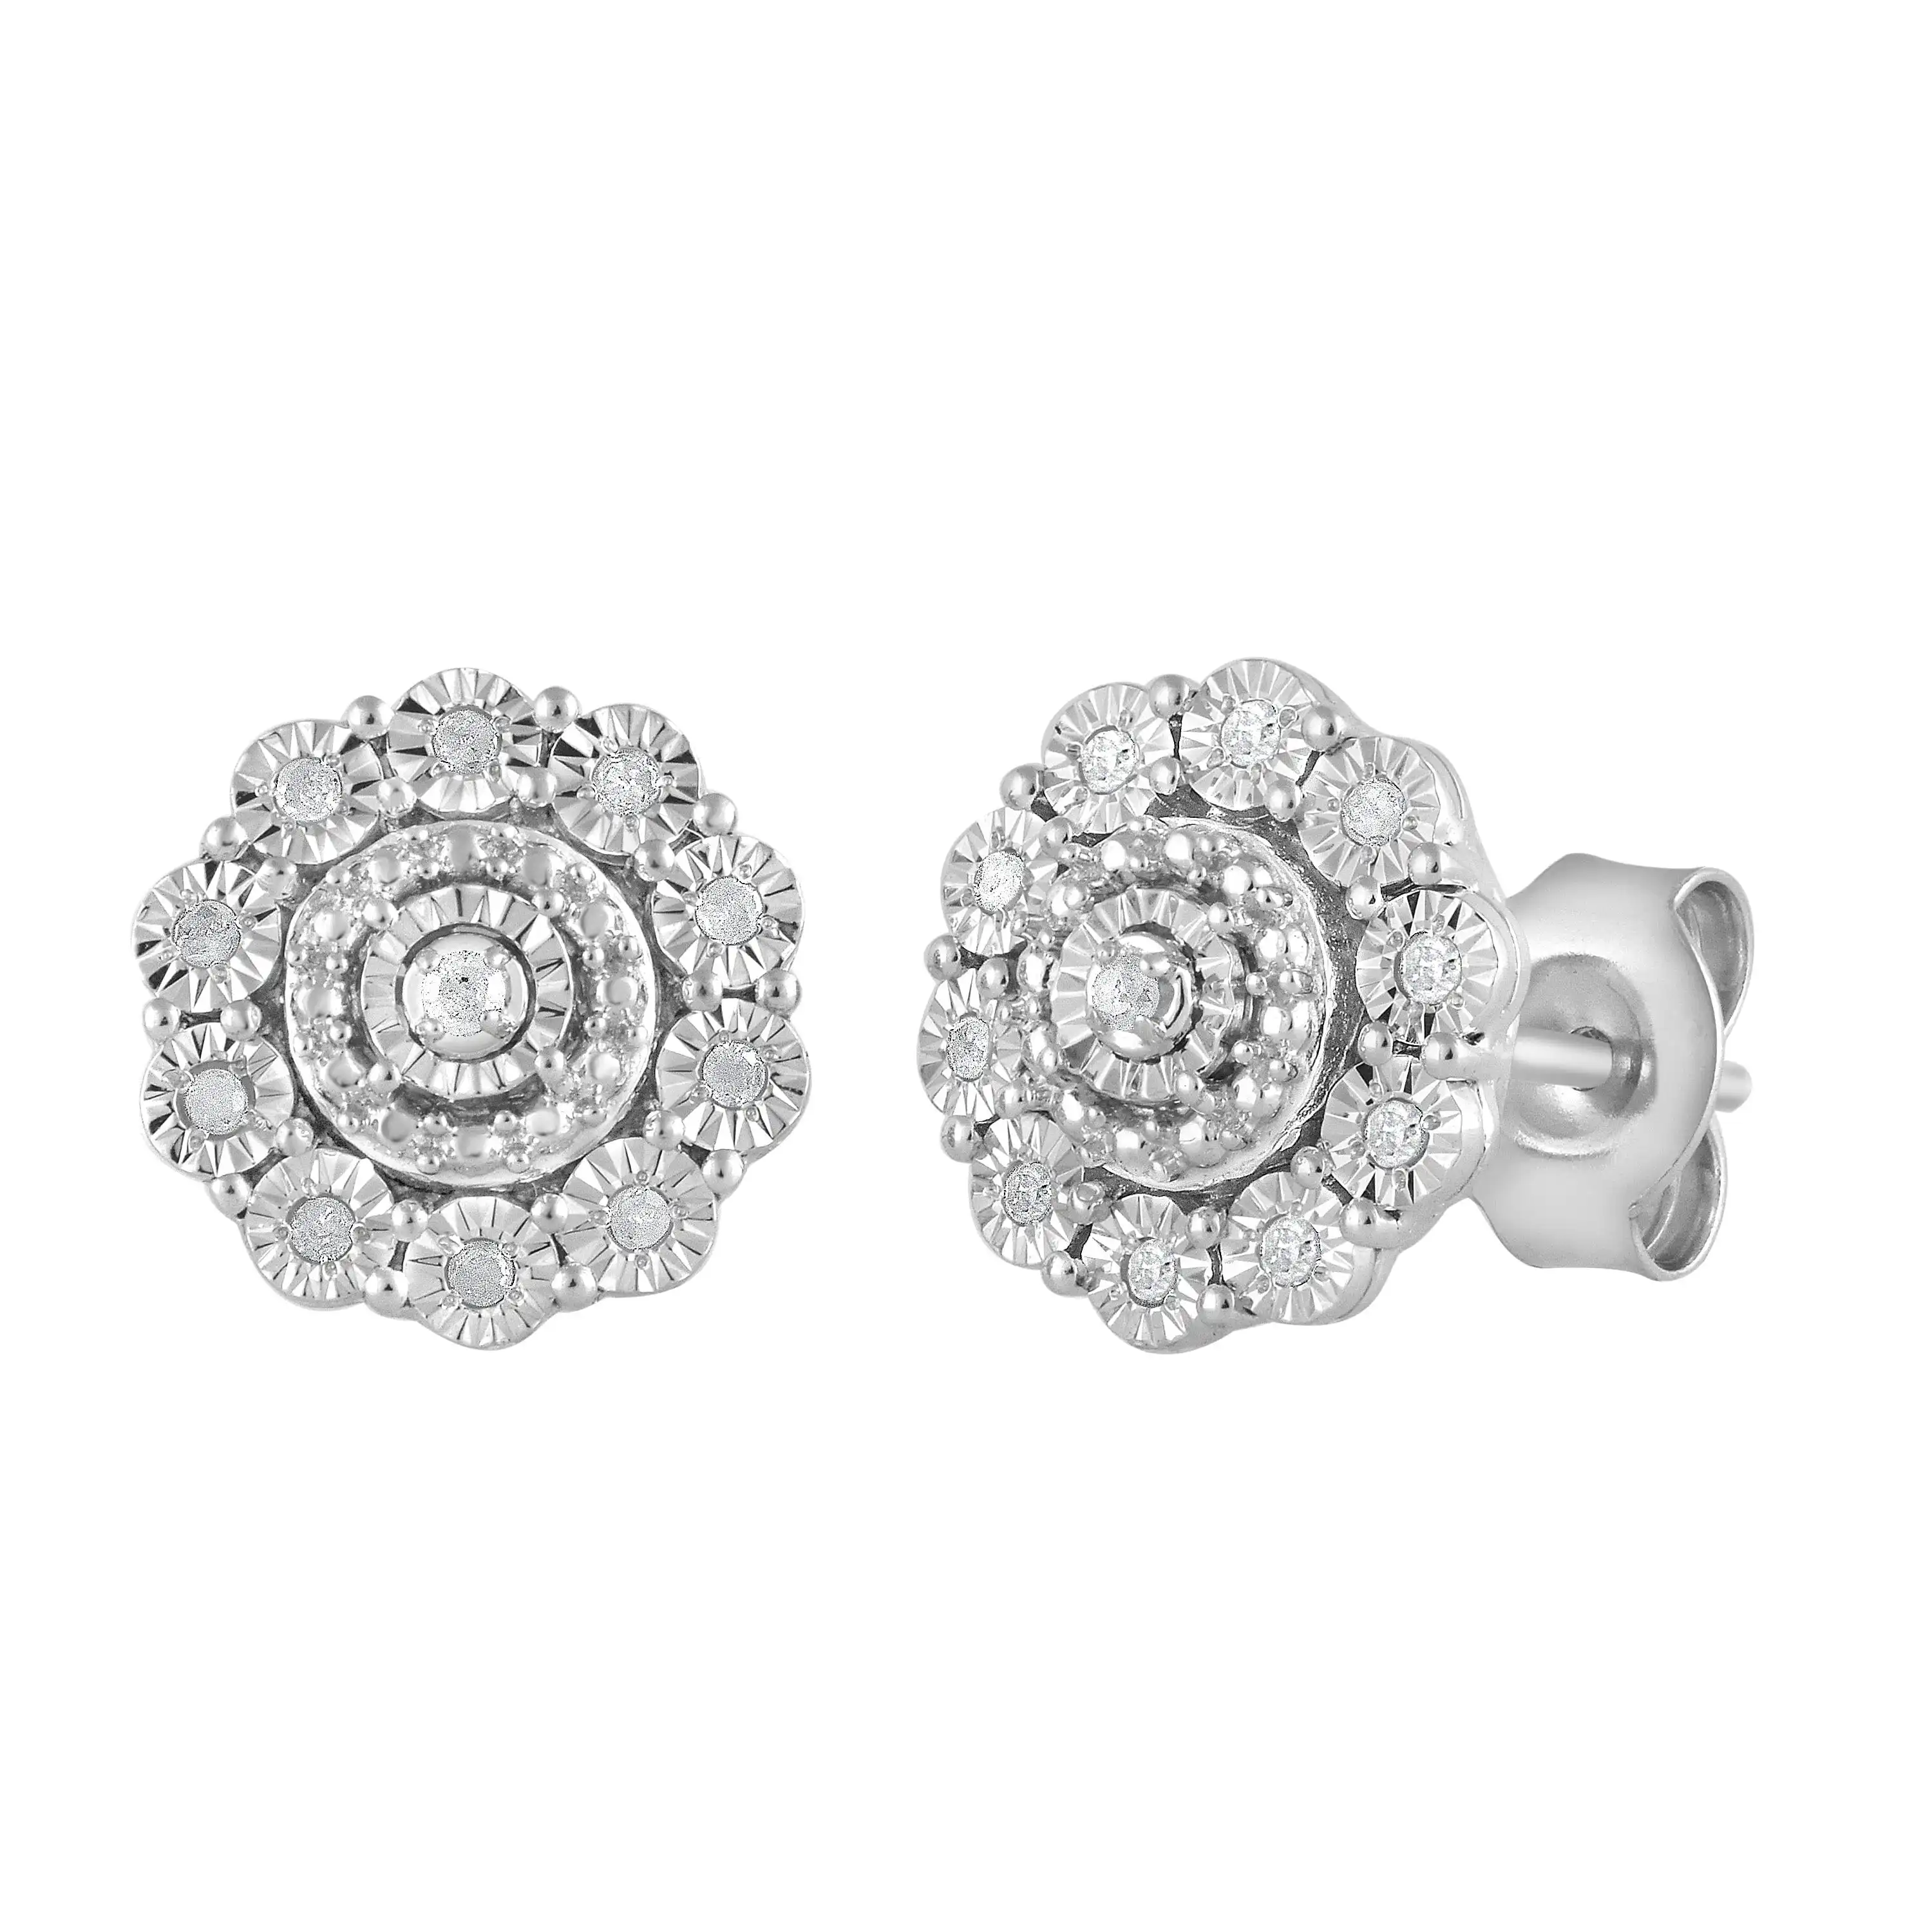 Brilliant Stud Earrings with 0.05ct of Diamonds in Sterling Silver